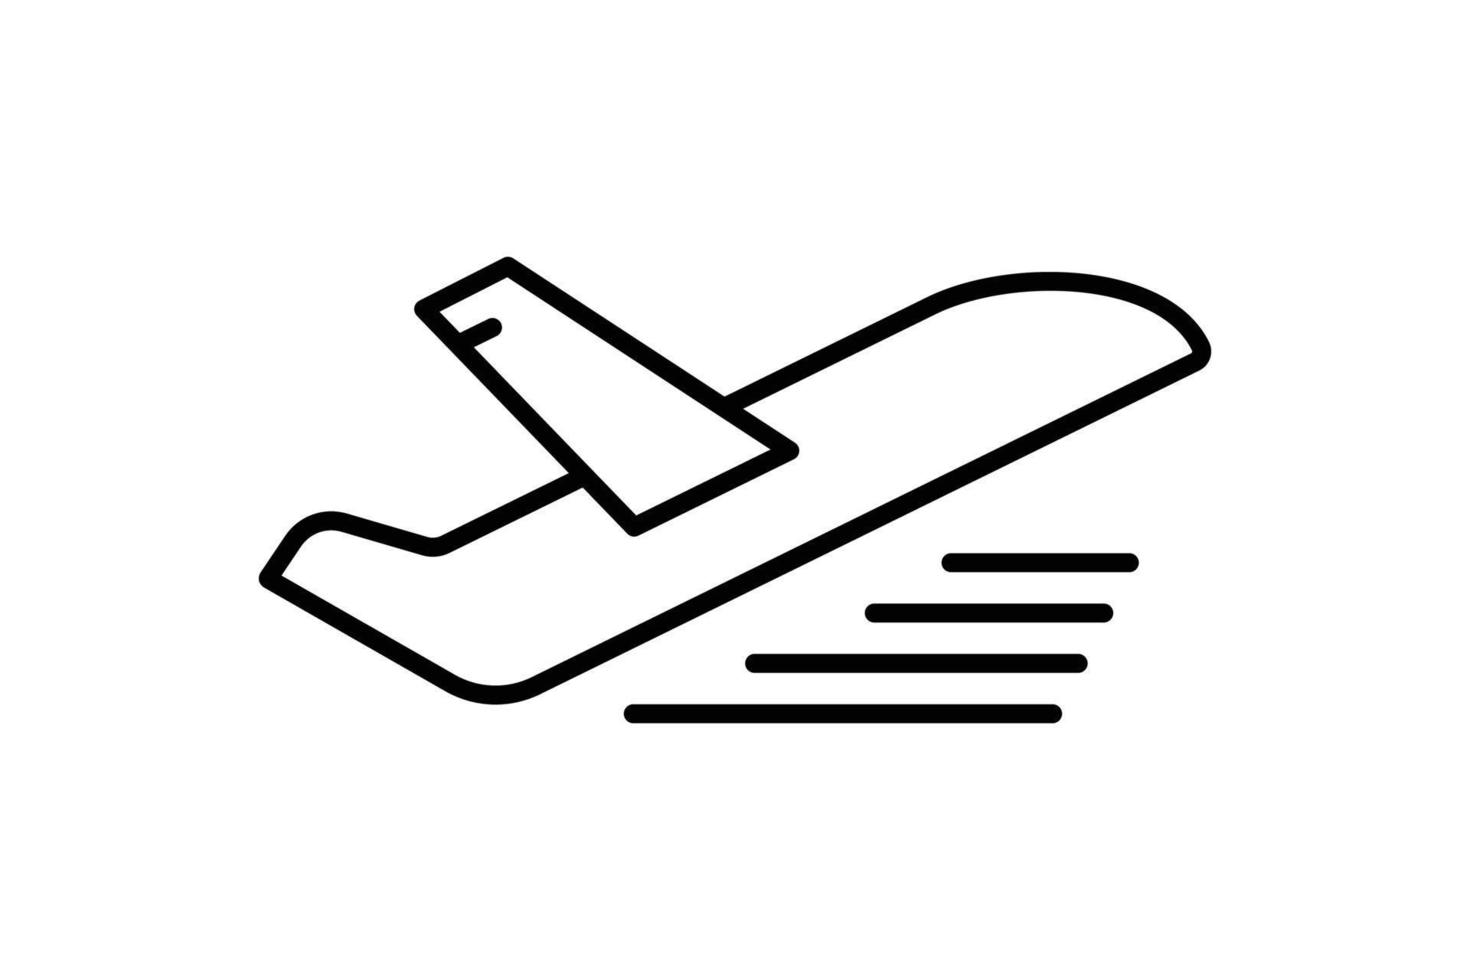 Airplane icon illustration. icon related to transportation, travel. Line icon style. Simple vector design editable